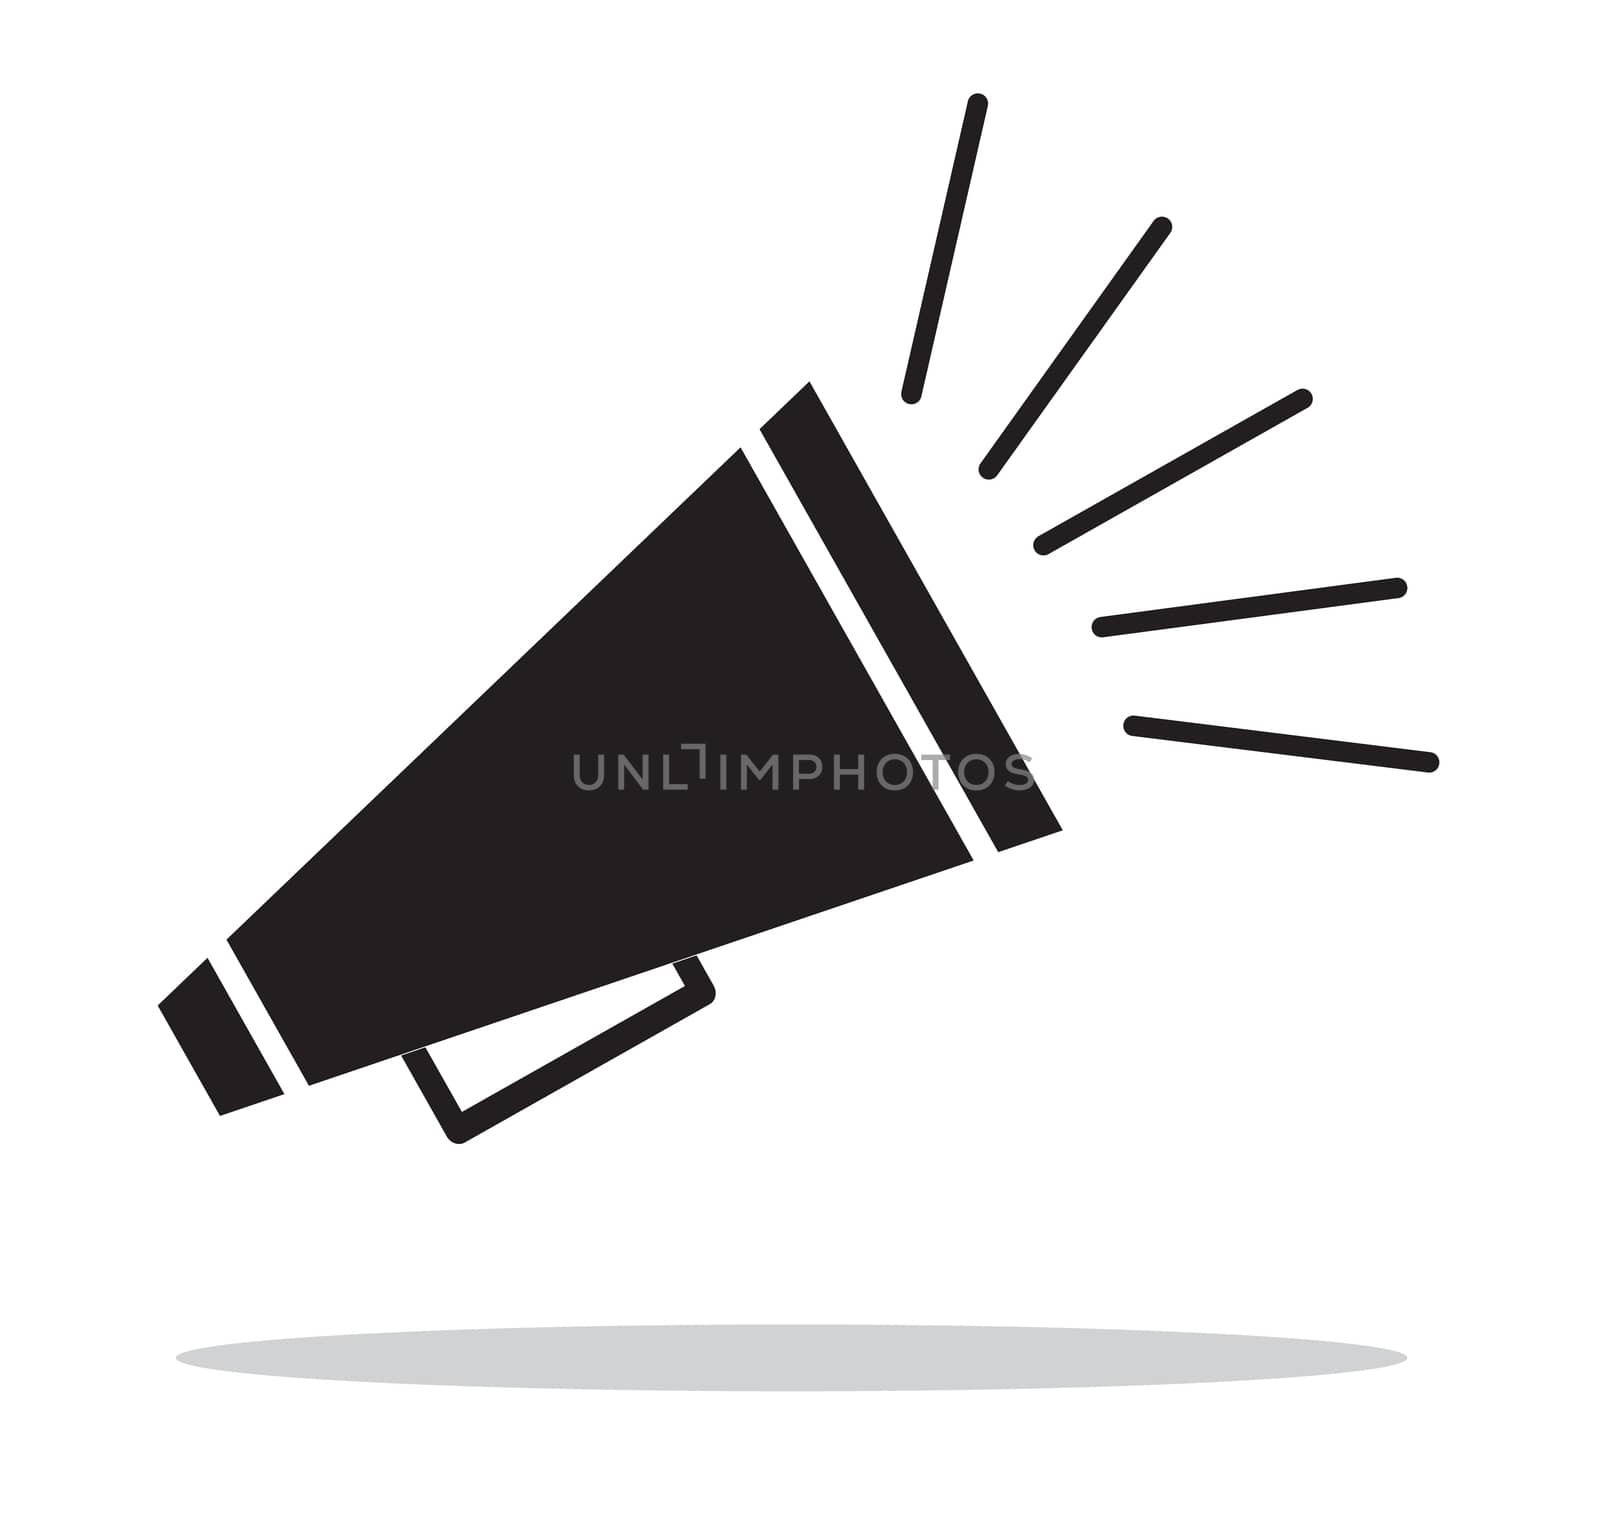 bullhorn icon on white background. Announce sign. bullhorn icon  by suthee